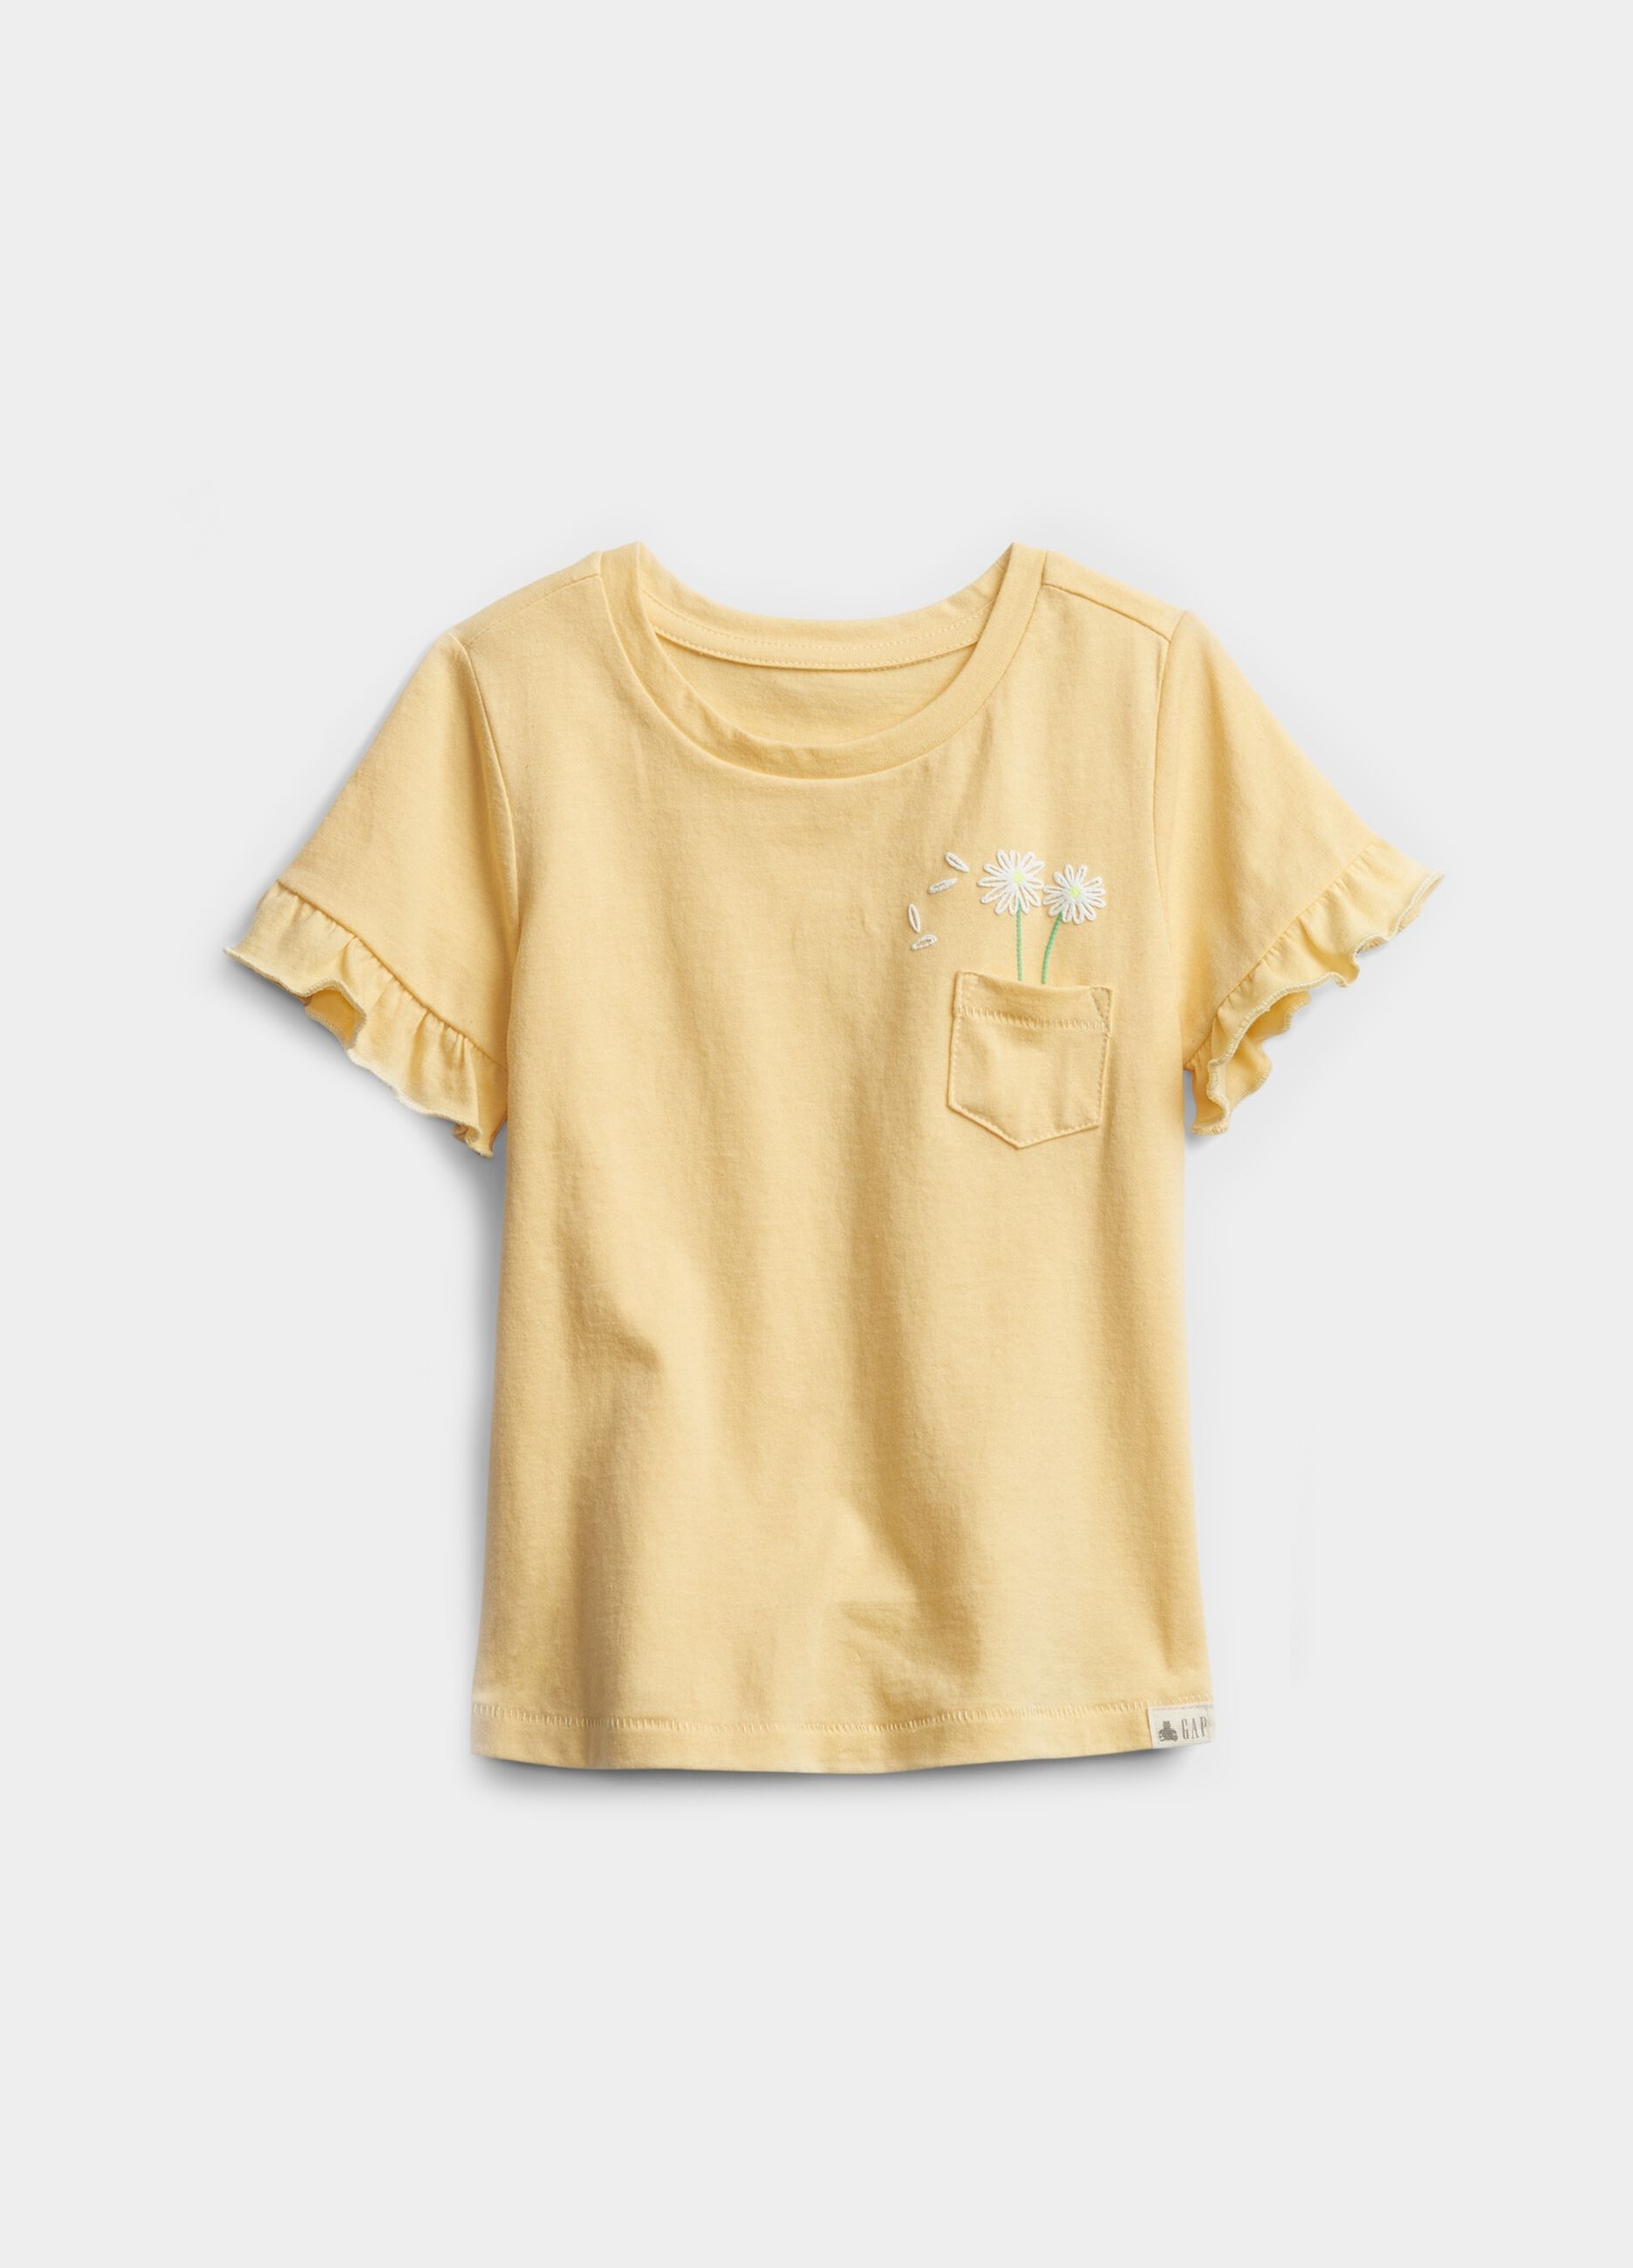 T-shirt with pocket and daisies embroidery